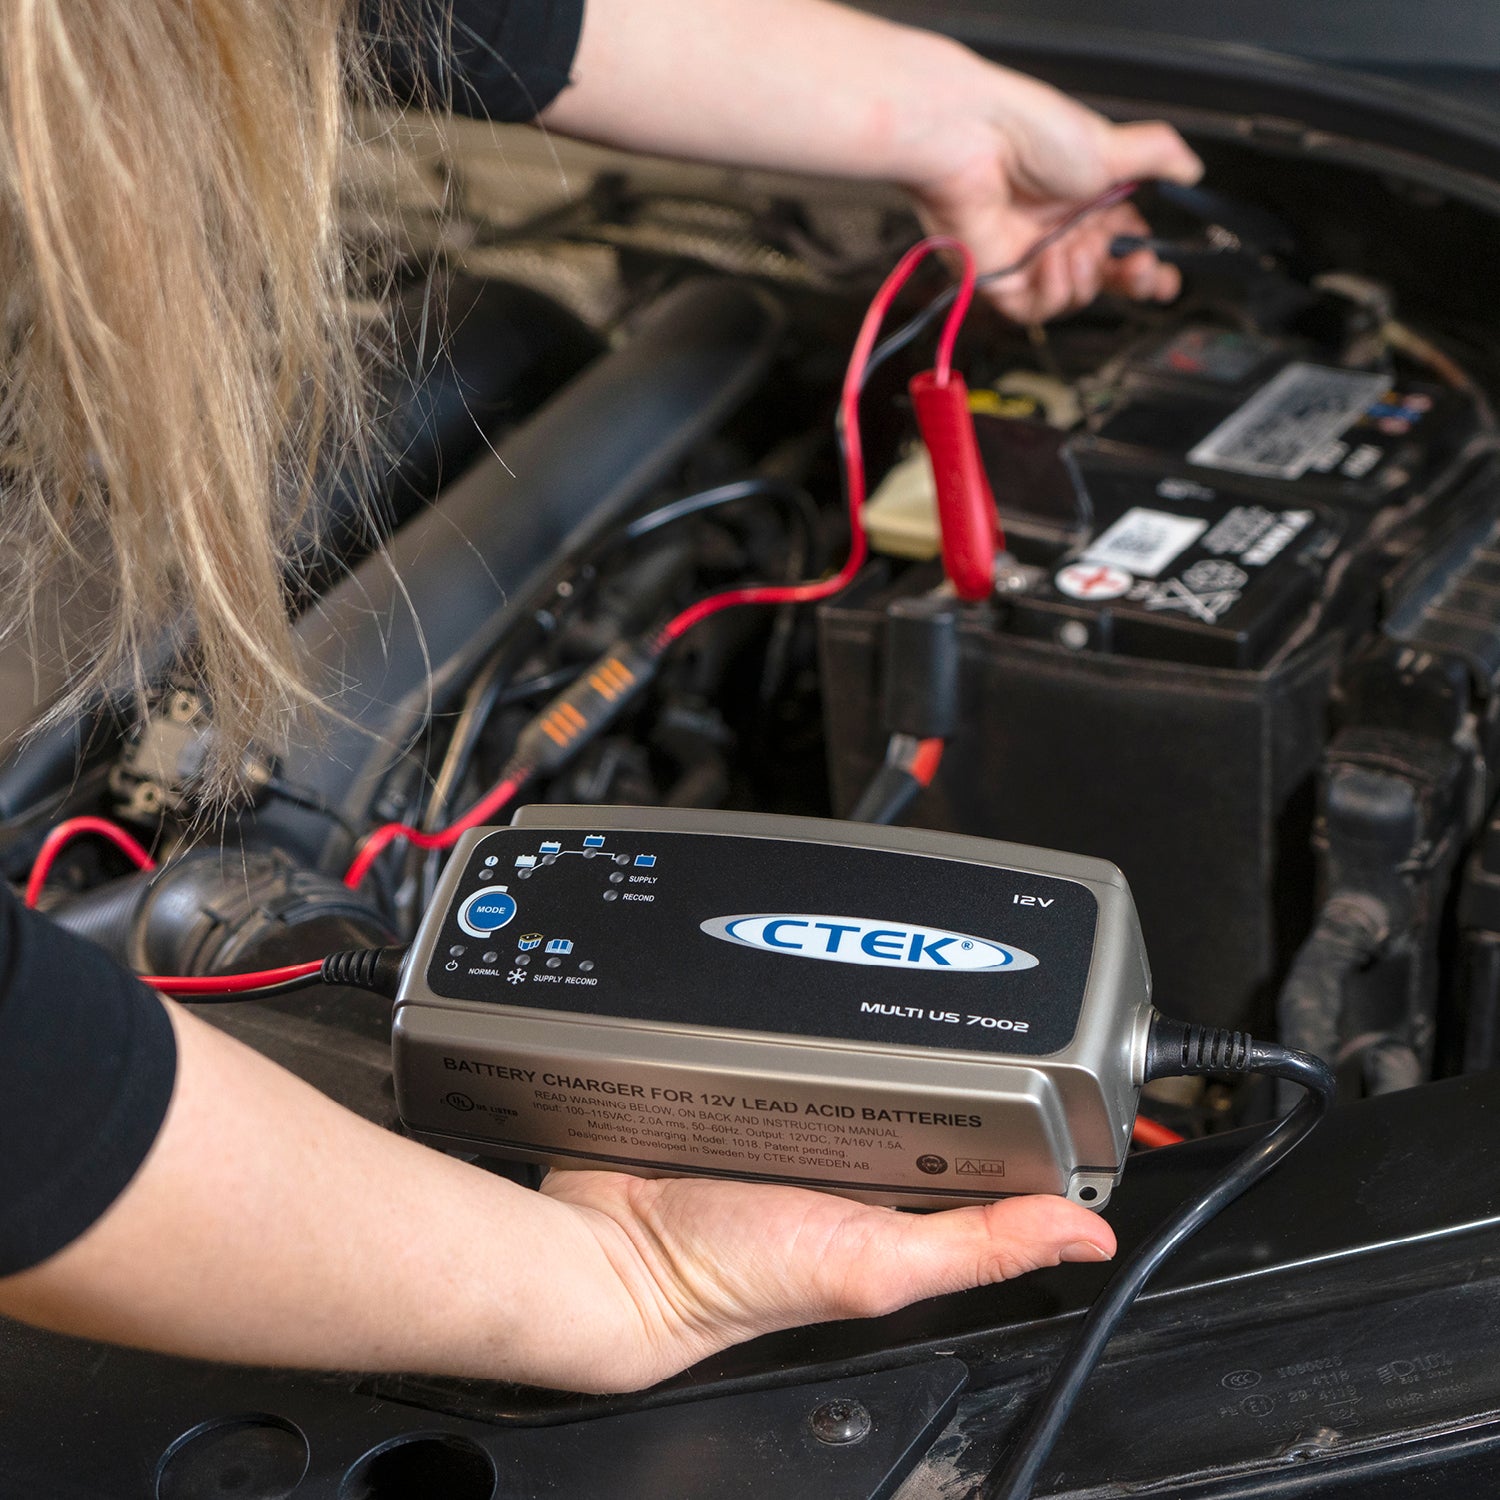 CTEK launches a revolutionary new battery charger and maintainer, with APTO  technology